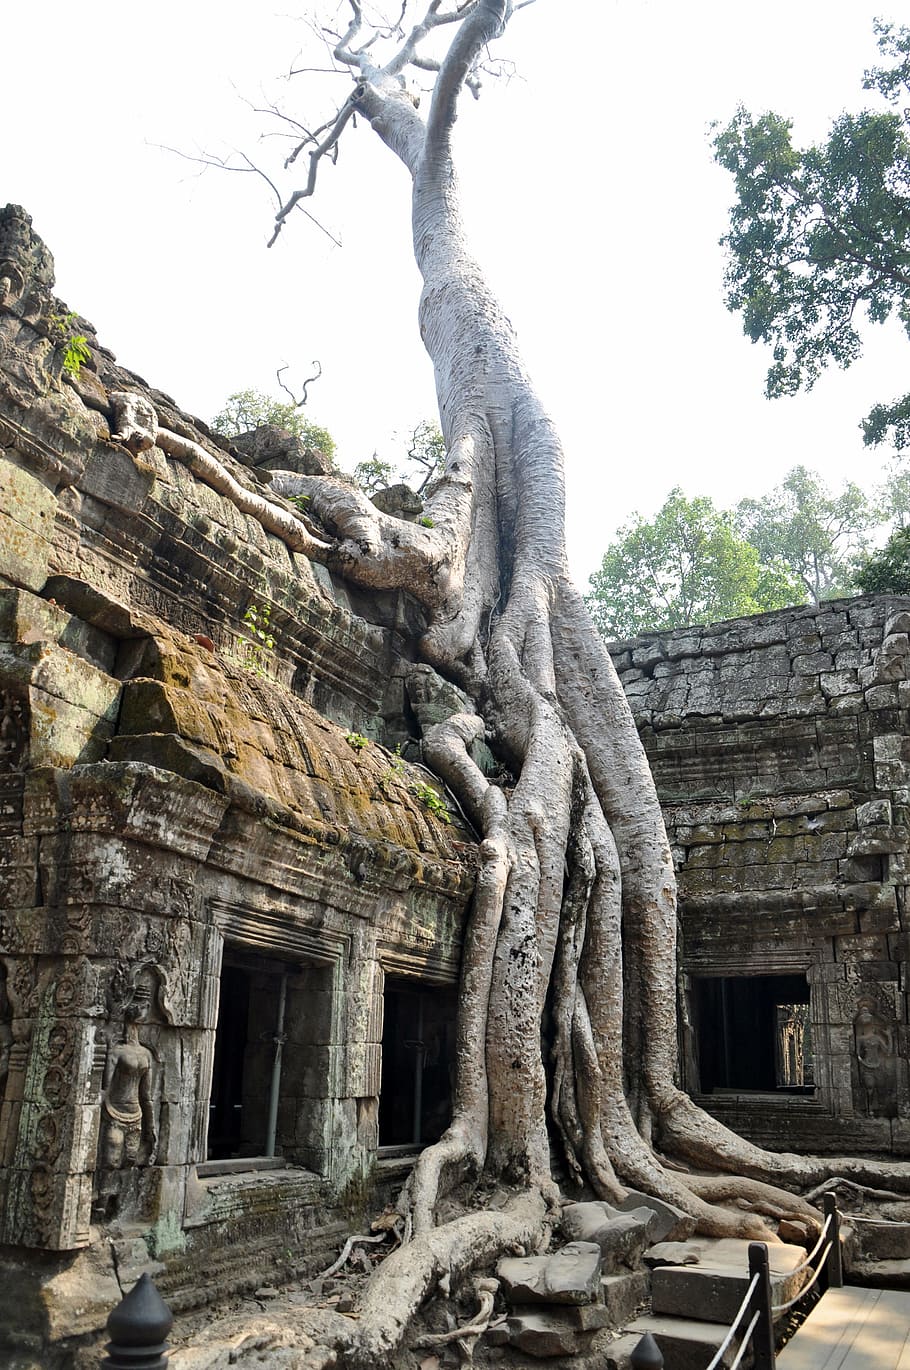 Angkor, Hinduism, Faces, Temple, Complex, temple complex, history, sculpture, historically, khmer